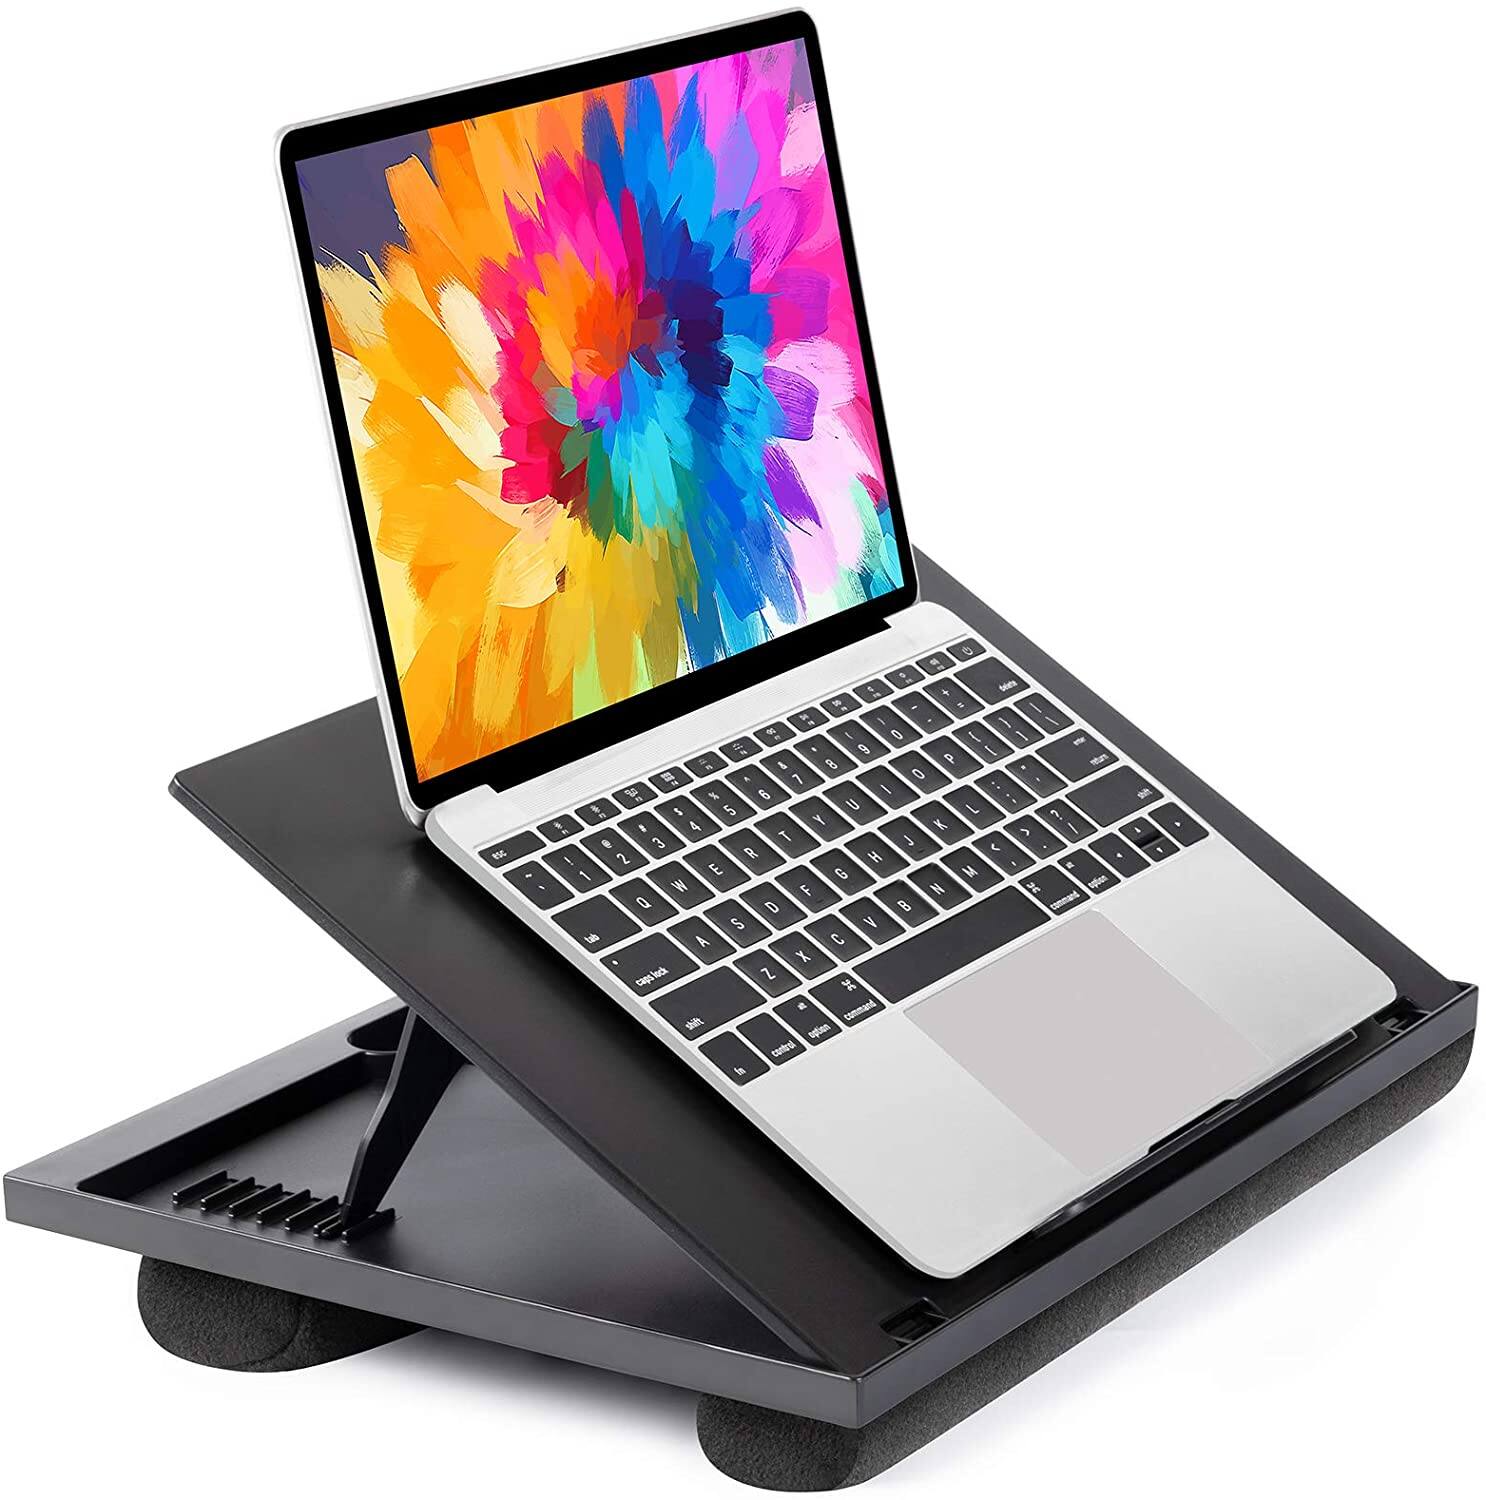 Adjustable Lap Desk with 8 Adjustable Angles & Dual Cushions only $9.99 + Free Shipping w/ Walmart orders $35+